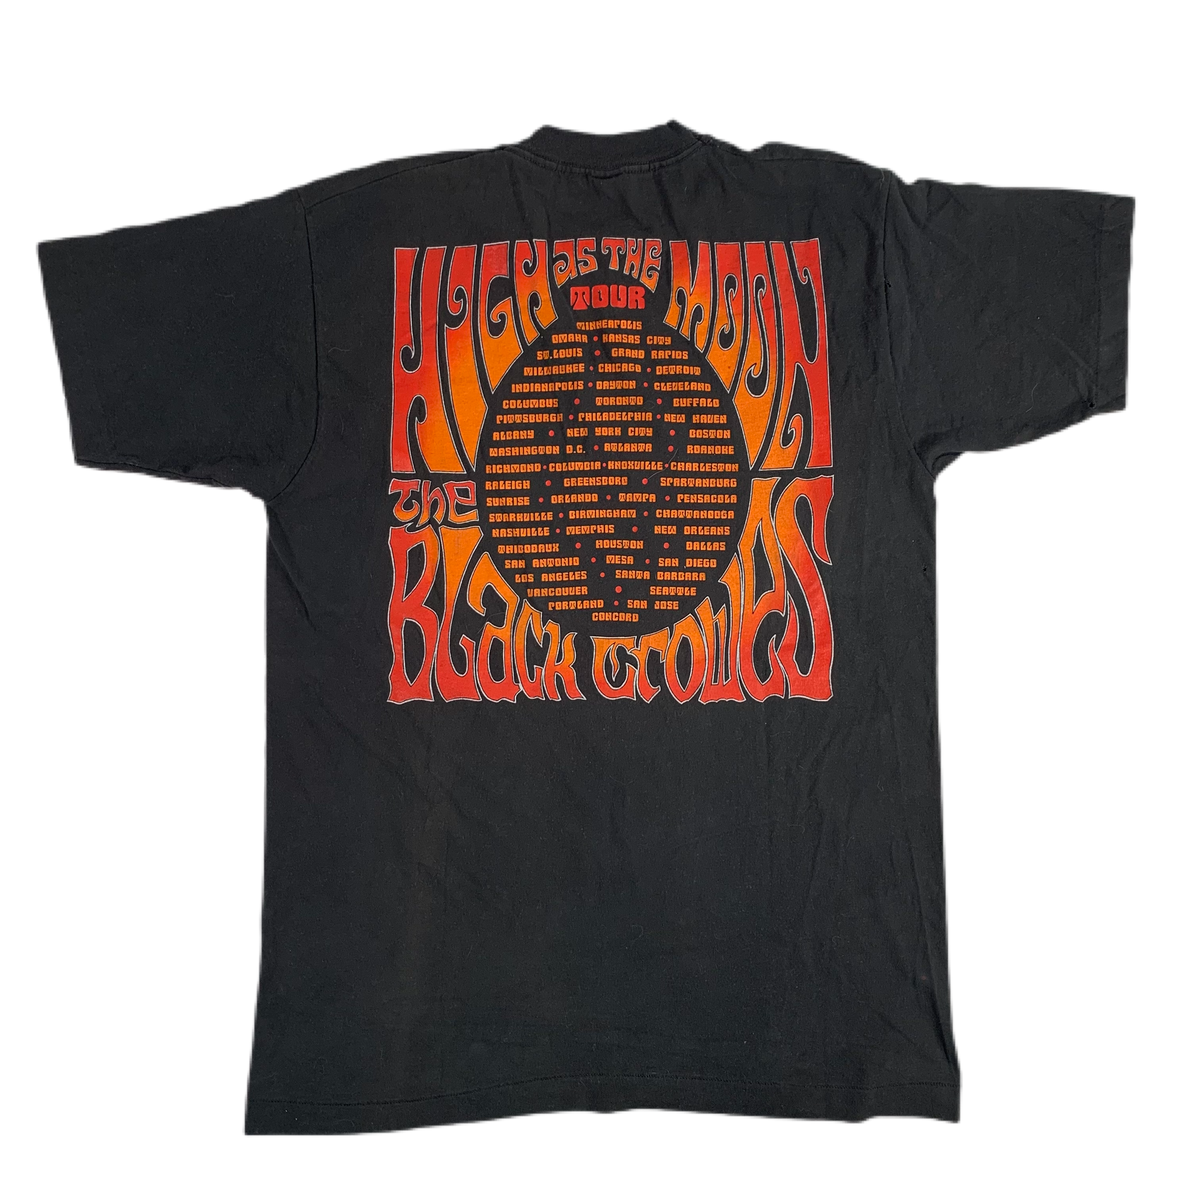 Vintage Black Crowes &quot;High As The Moon&quot; T-Shirt